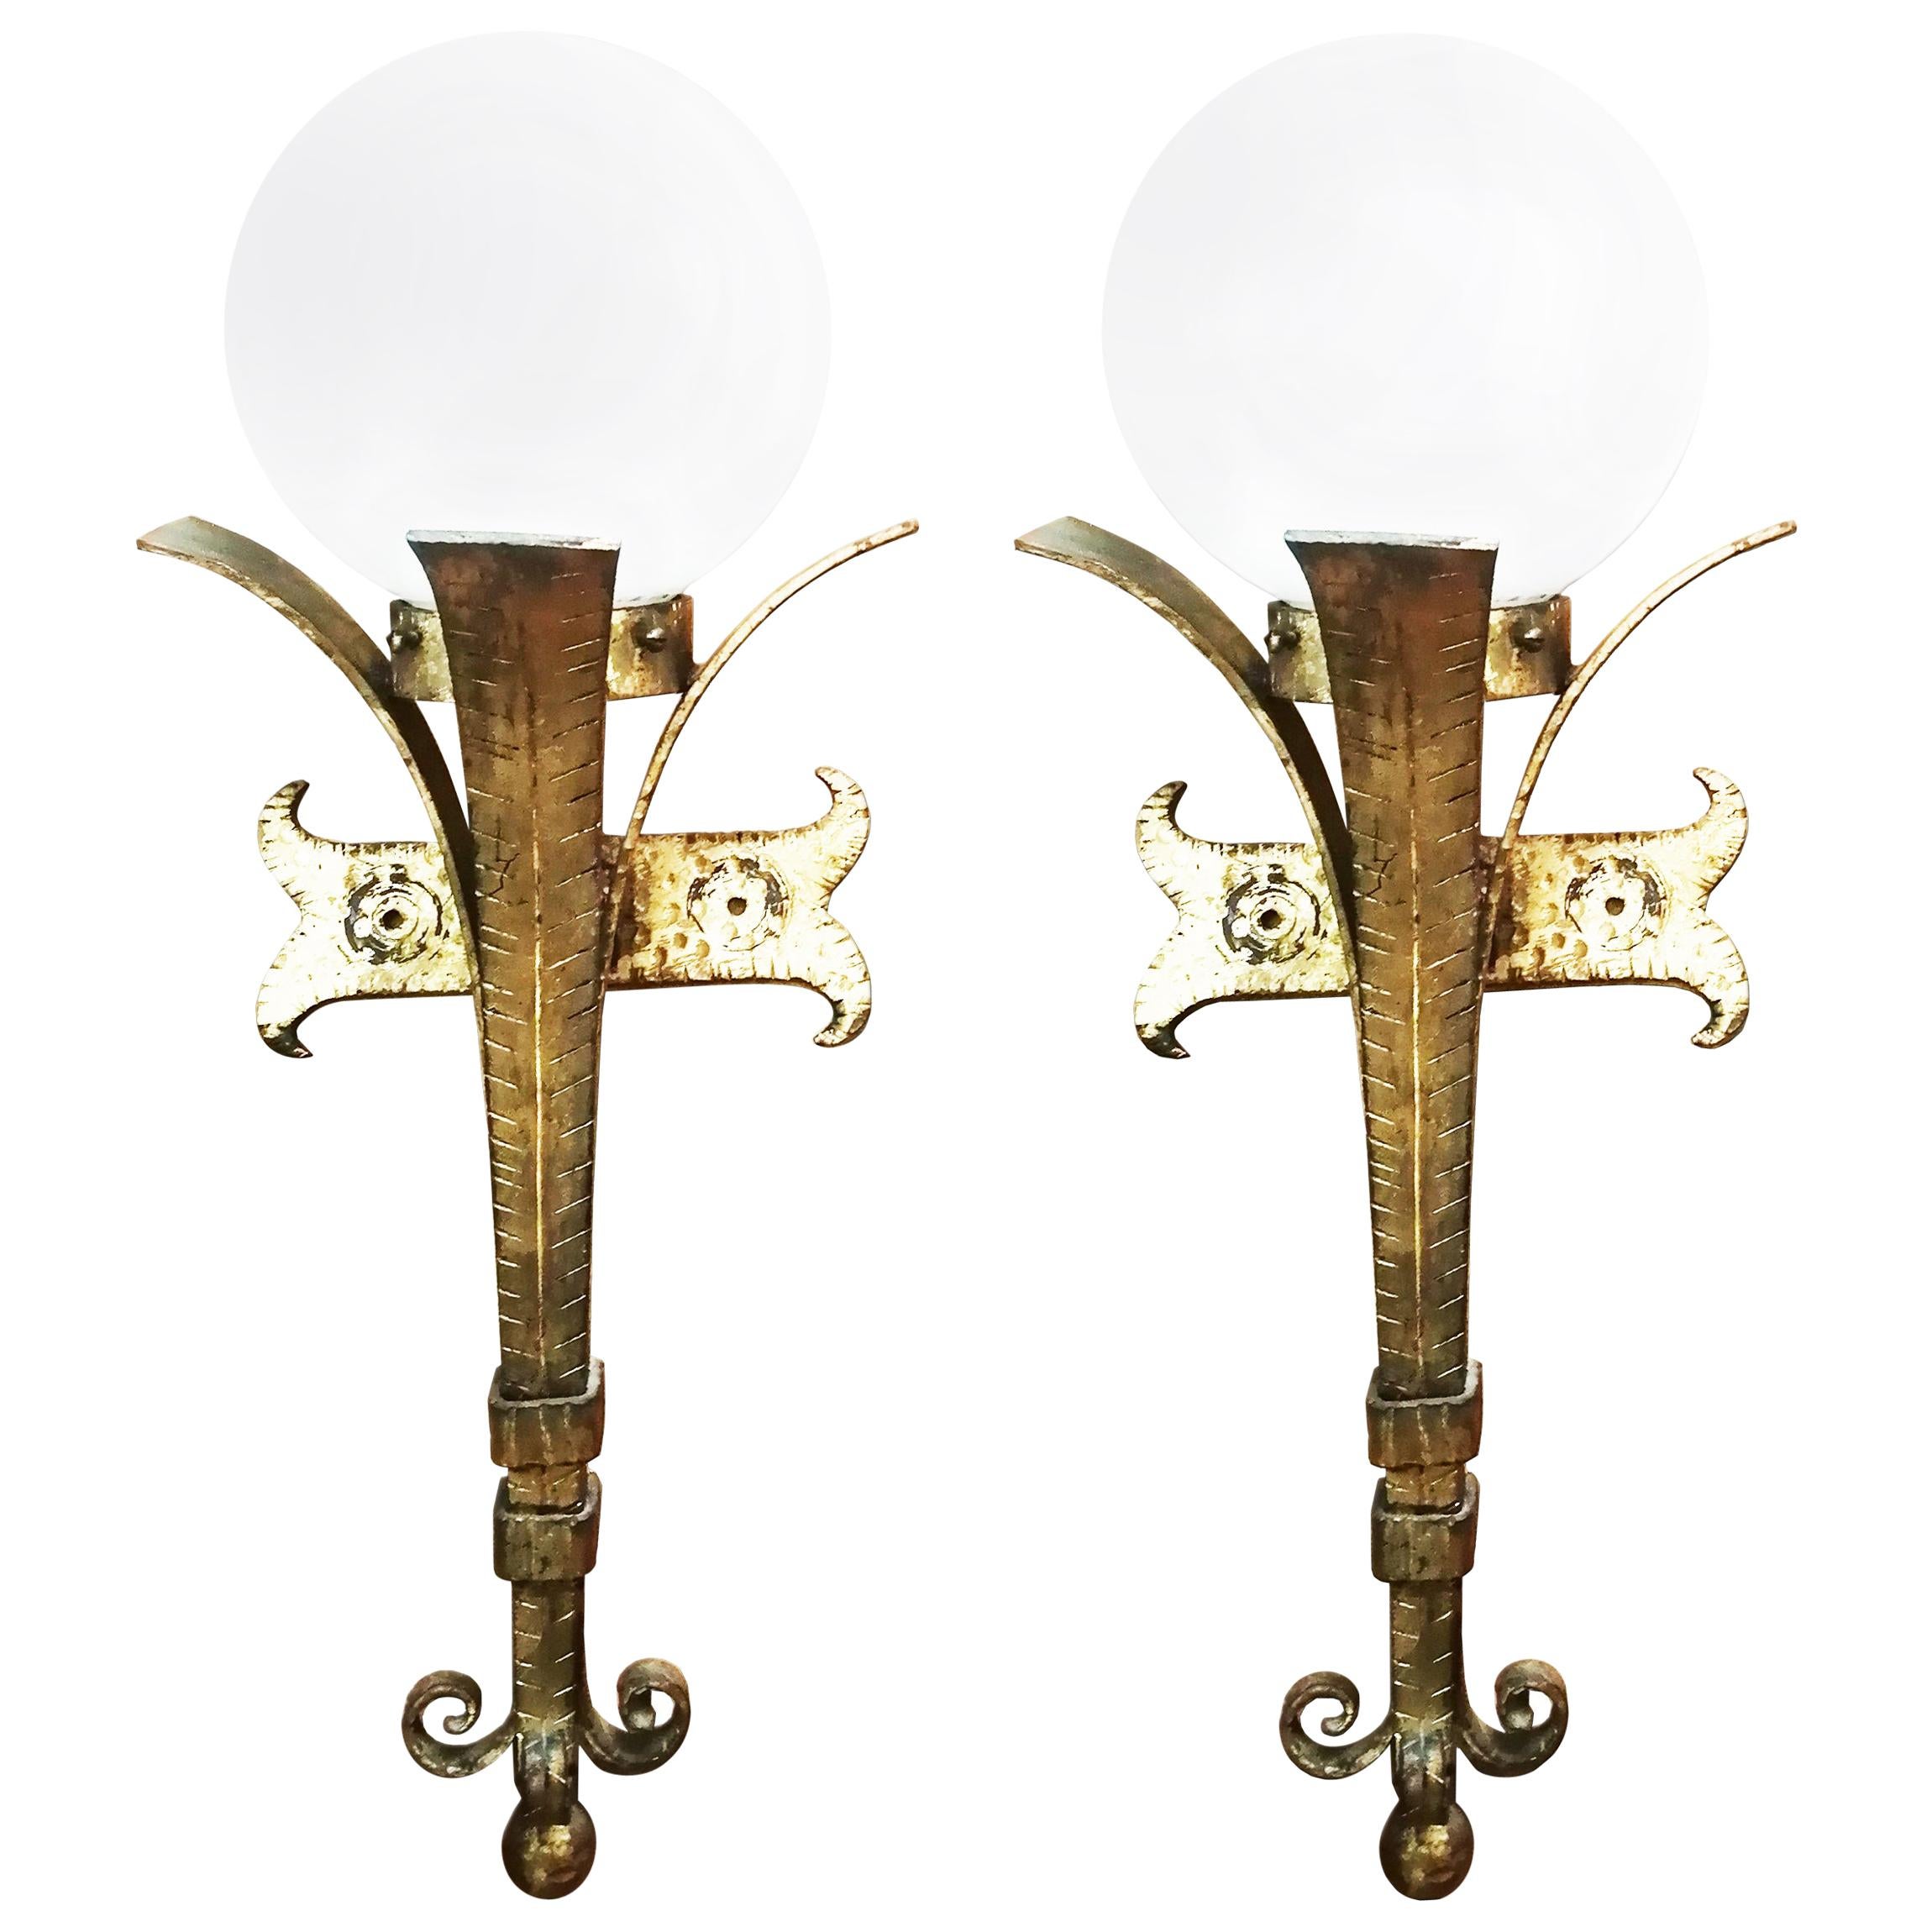  Pair of  Torch Form  Wall Sconces Wrought Iron & Gold Leaf With Glove Opaline Glass, 

Pair of iron gloden wall lamps or sconces torch form with glove Opaline glass

Midcentury torch lamp iron wall sconces with opaline glass

Sconces iron golden